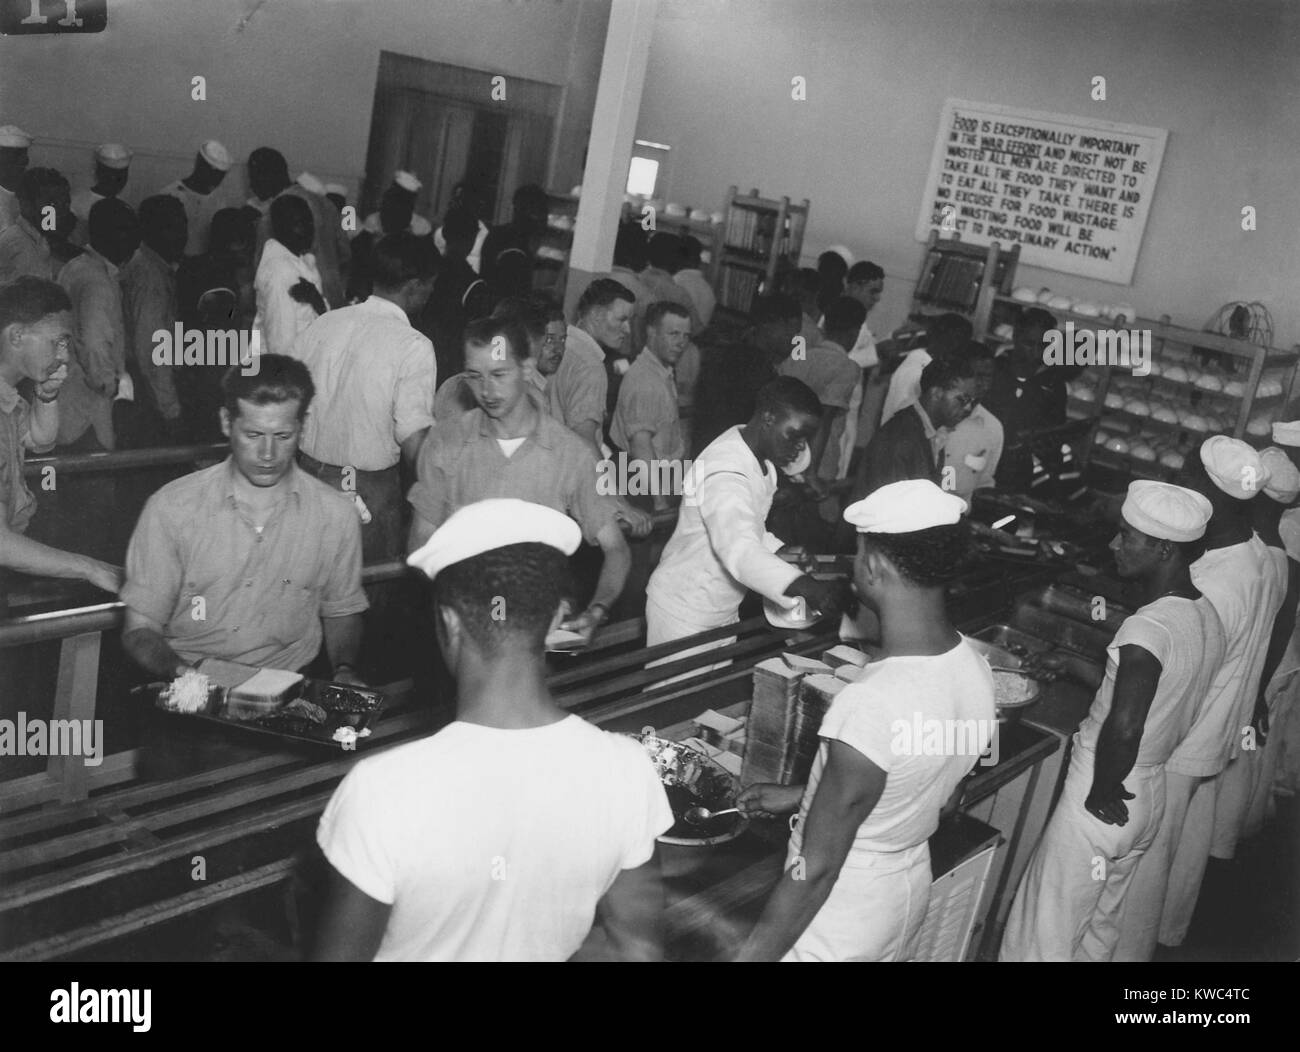 African America enlisted men in Mess Hall serving whites first at Hastings, Nebraska, 1944. In June 1944, racial conflict erupted at the Hastings Naval Ammunition Depot which produced over one-third of munitions for the U.S. Navy. This photo was taken in the investigation that followed. World War 2 (BSLOC 2015 13 100) Stock Photo